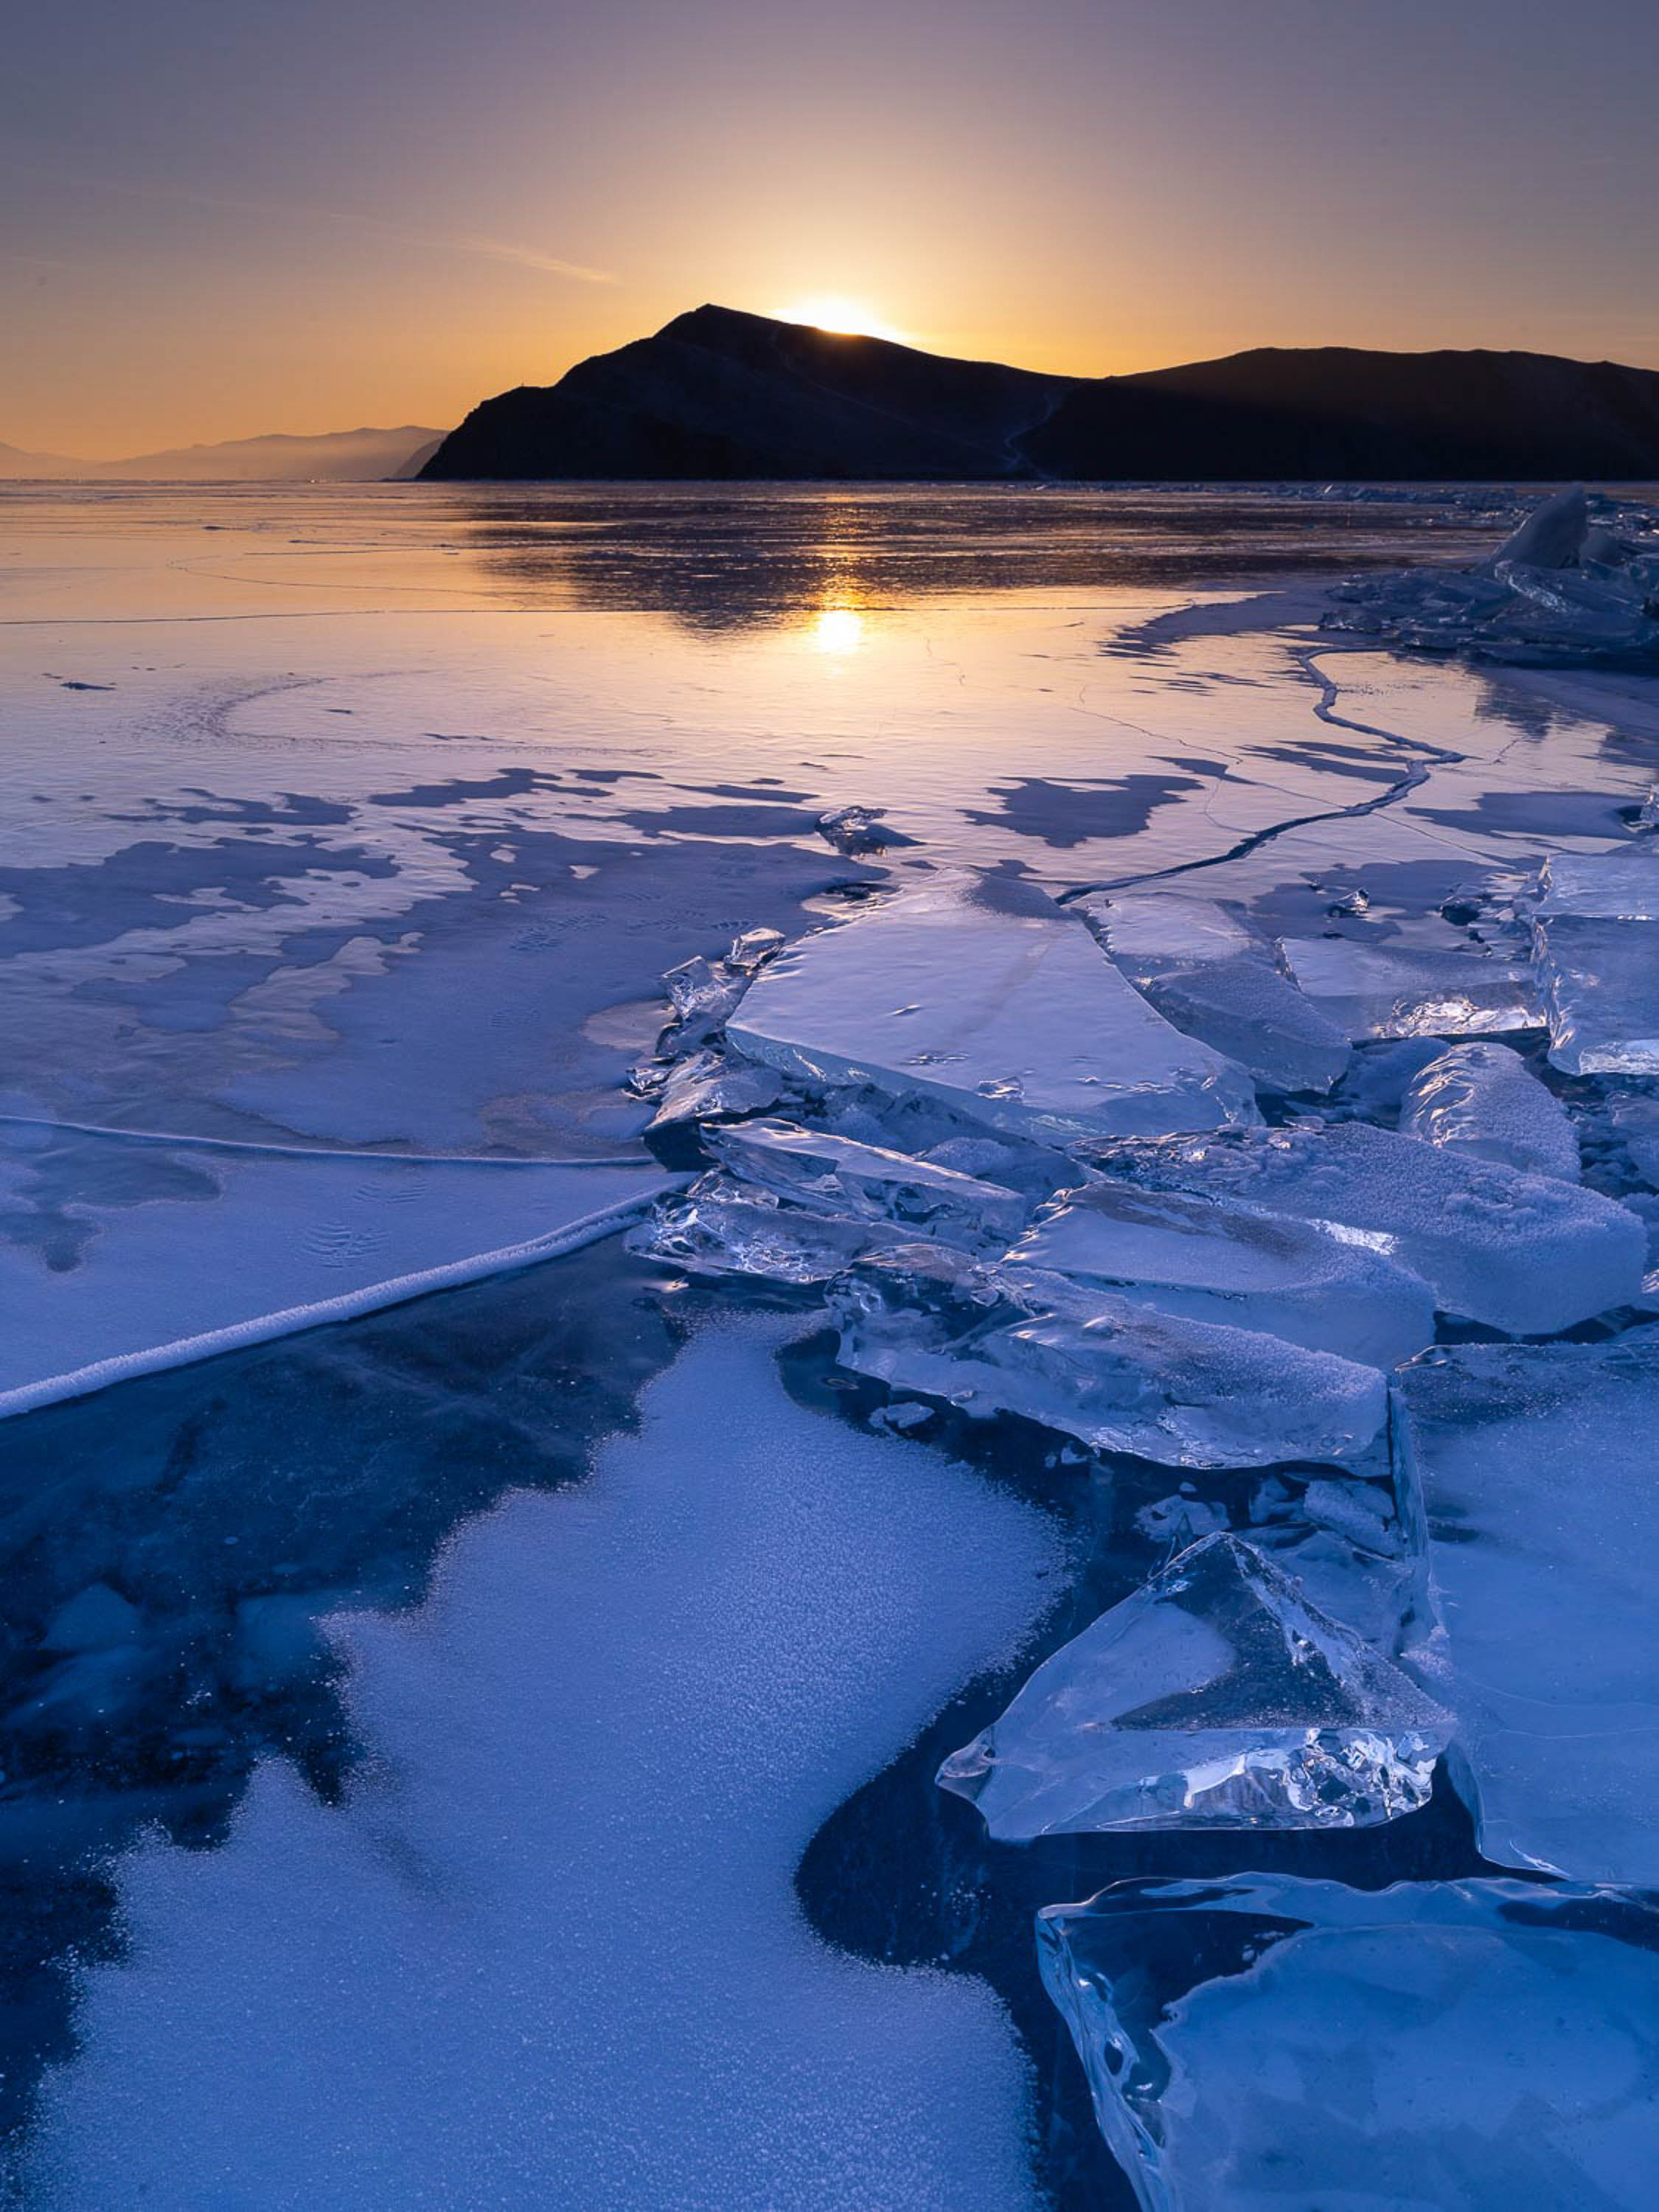 A cold lake with many crystalline ice pieces on it, and a long mountain wall with sunset besides, Lake Baikal #53, Siberia, Russia